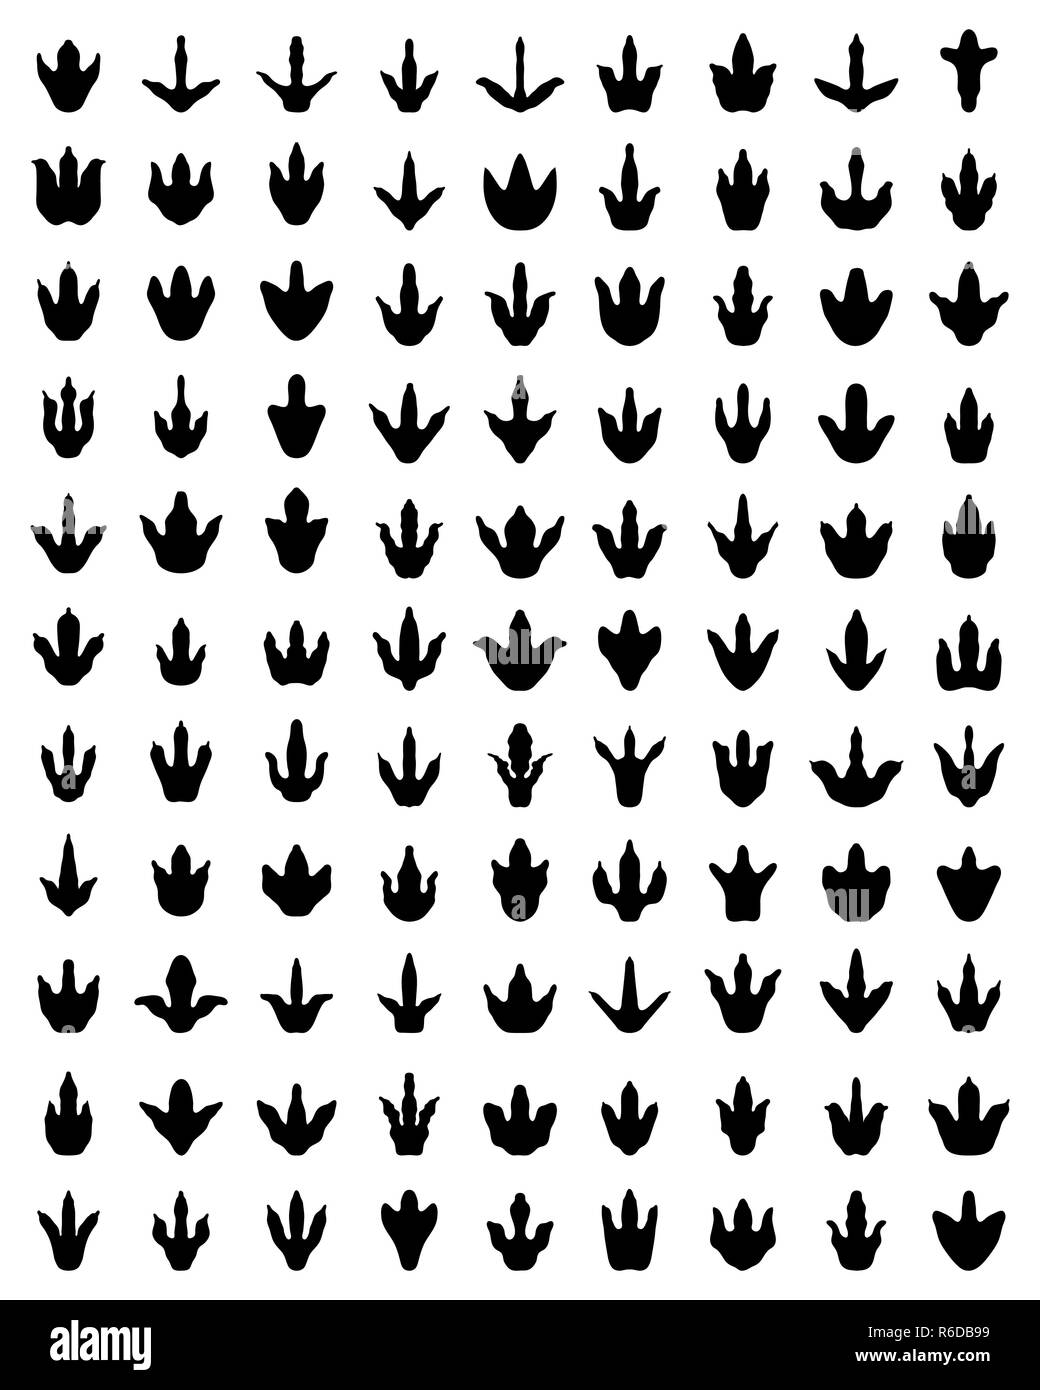 Black footprints of dinosaurs on a white background Stock Photo